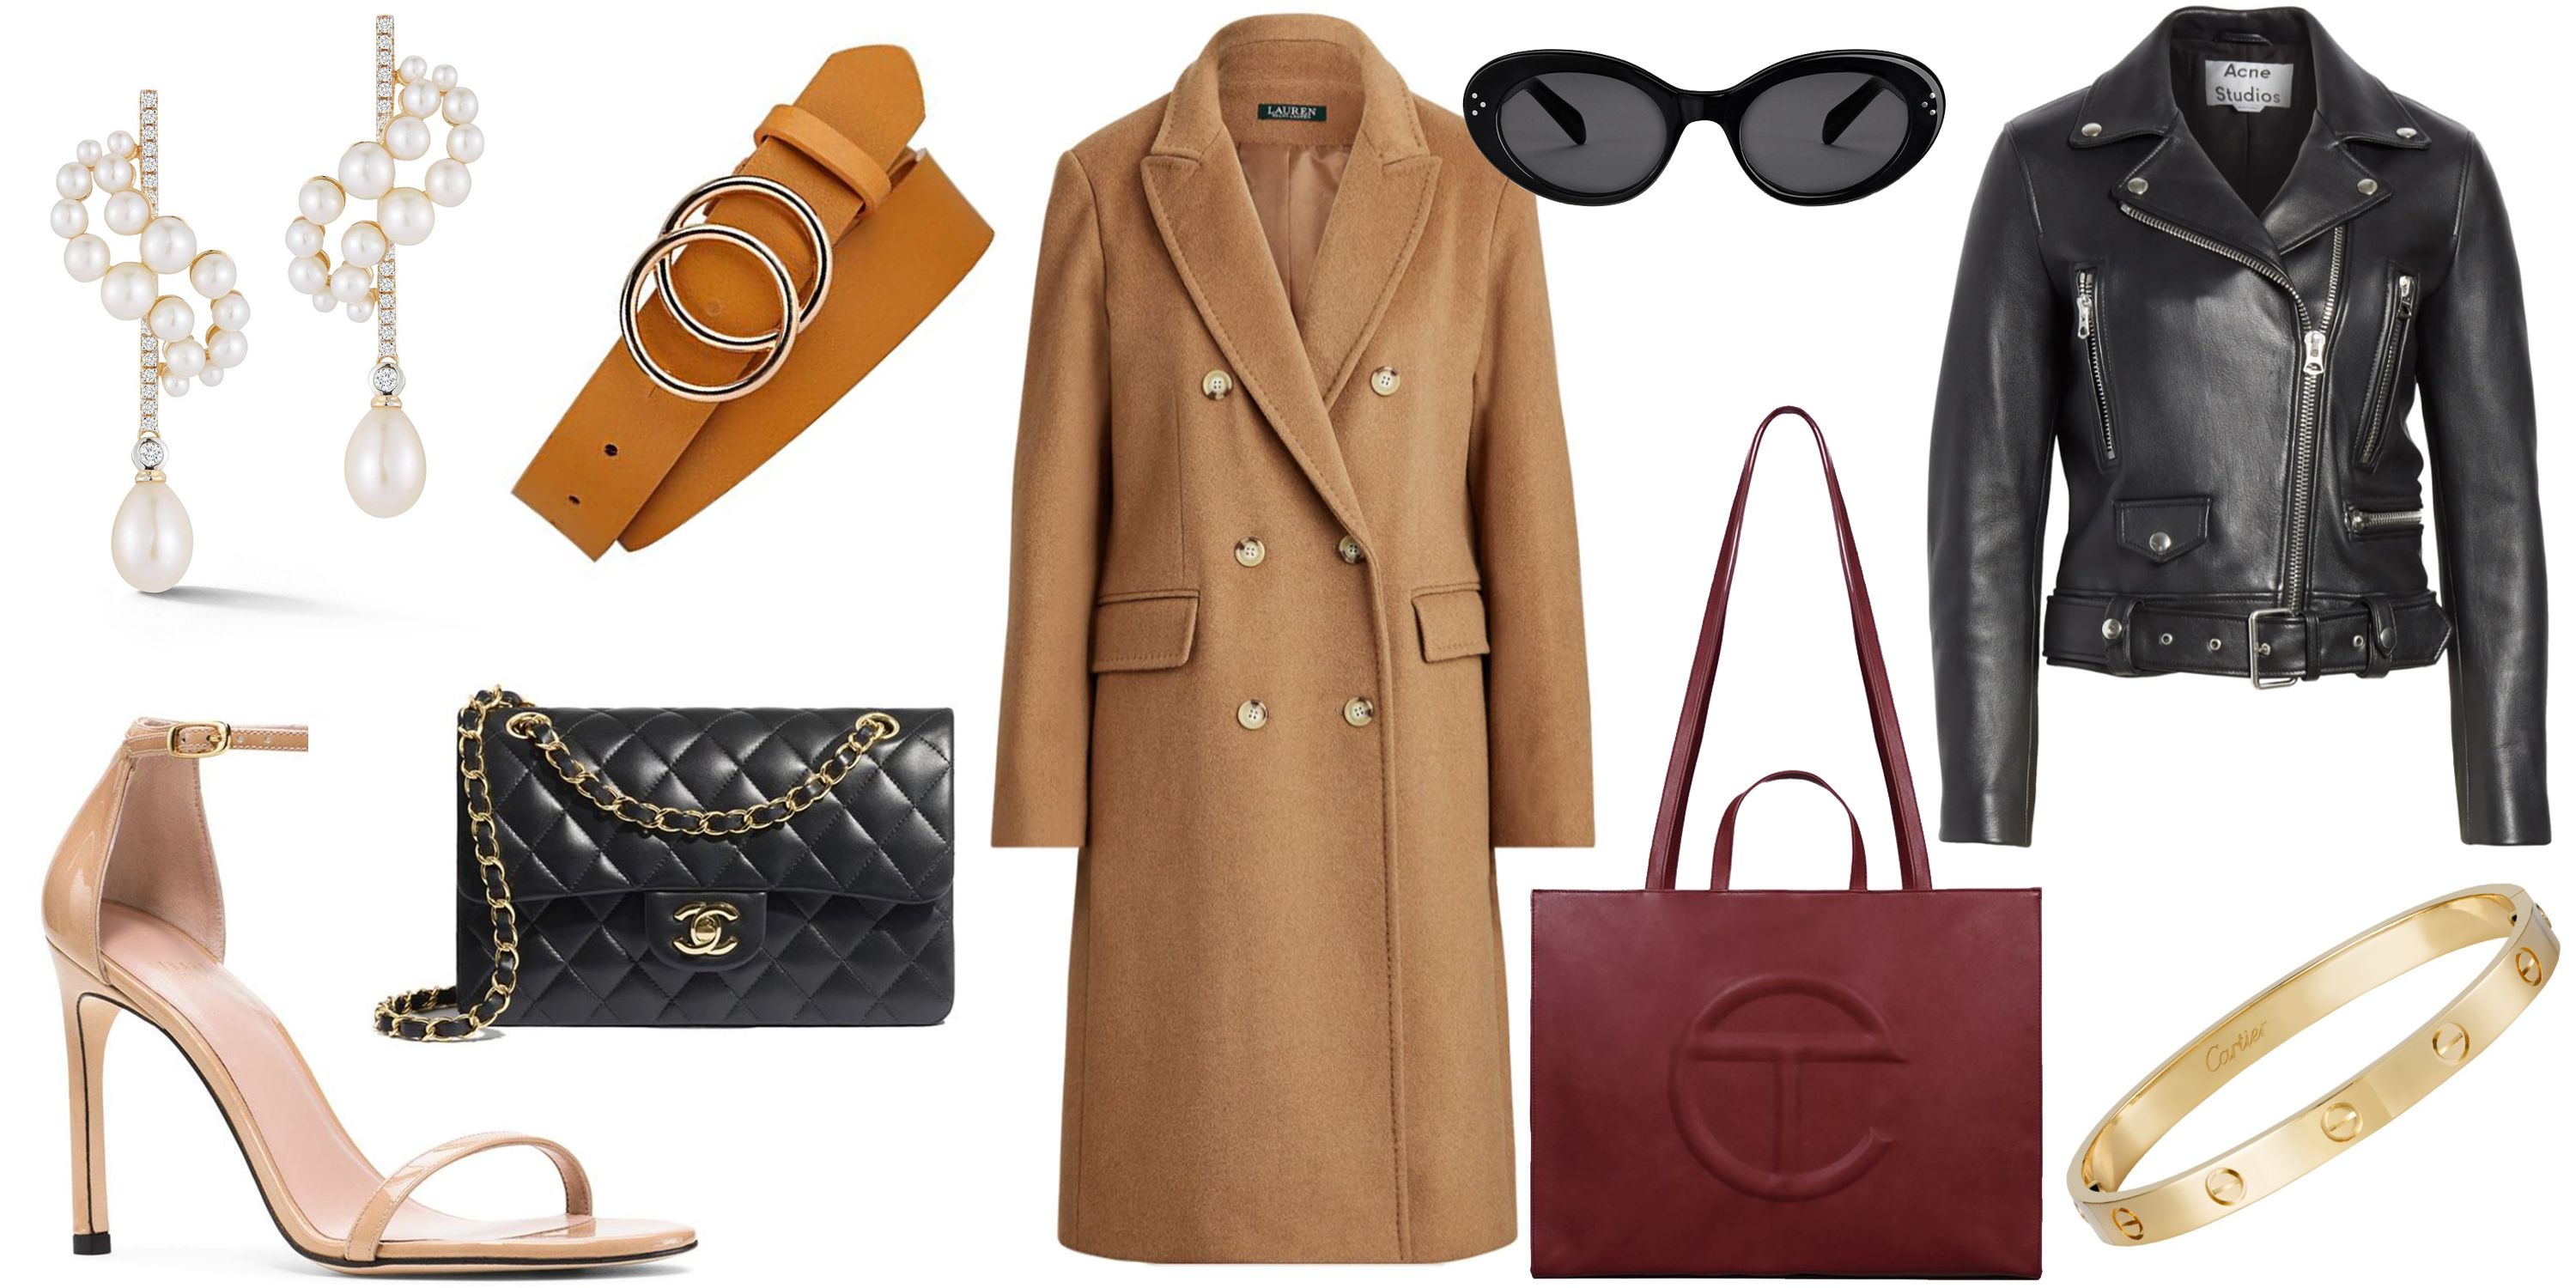 30 Wardrobe Staples You Need Right Now - 30 Basic Items Every